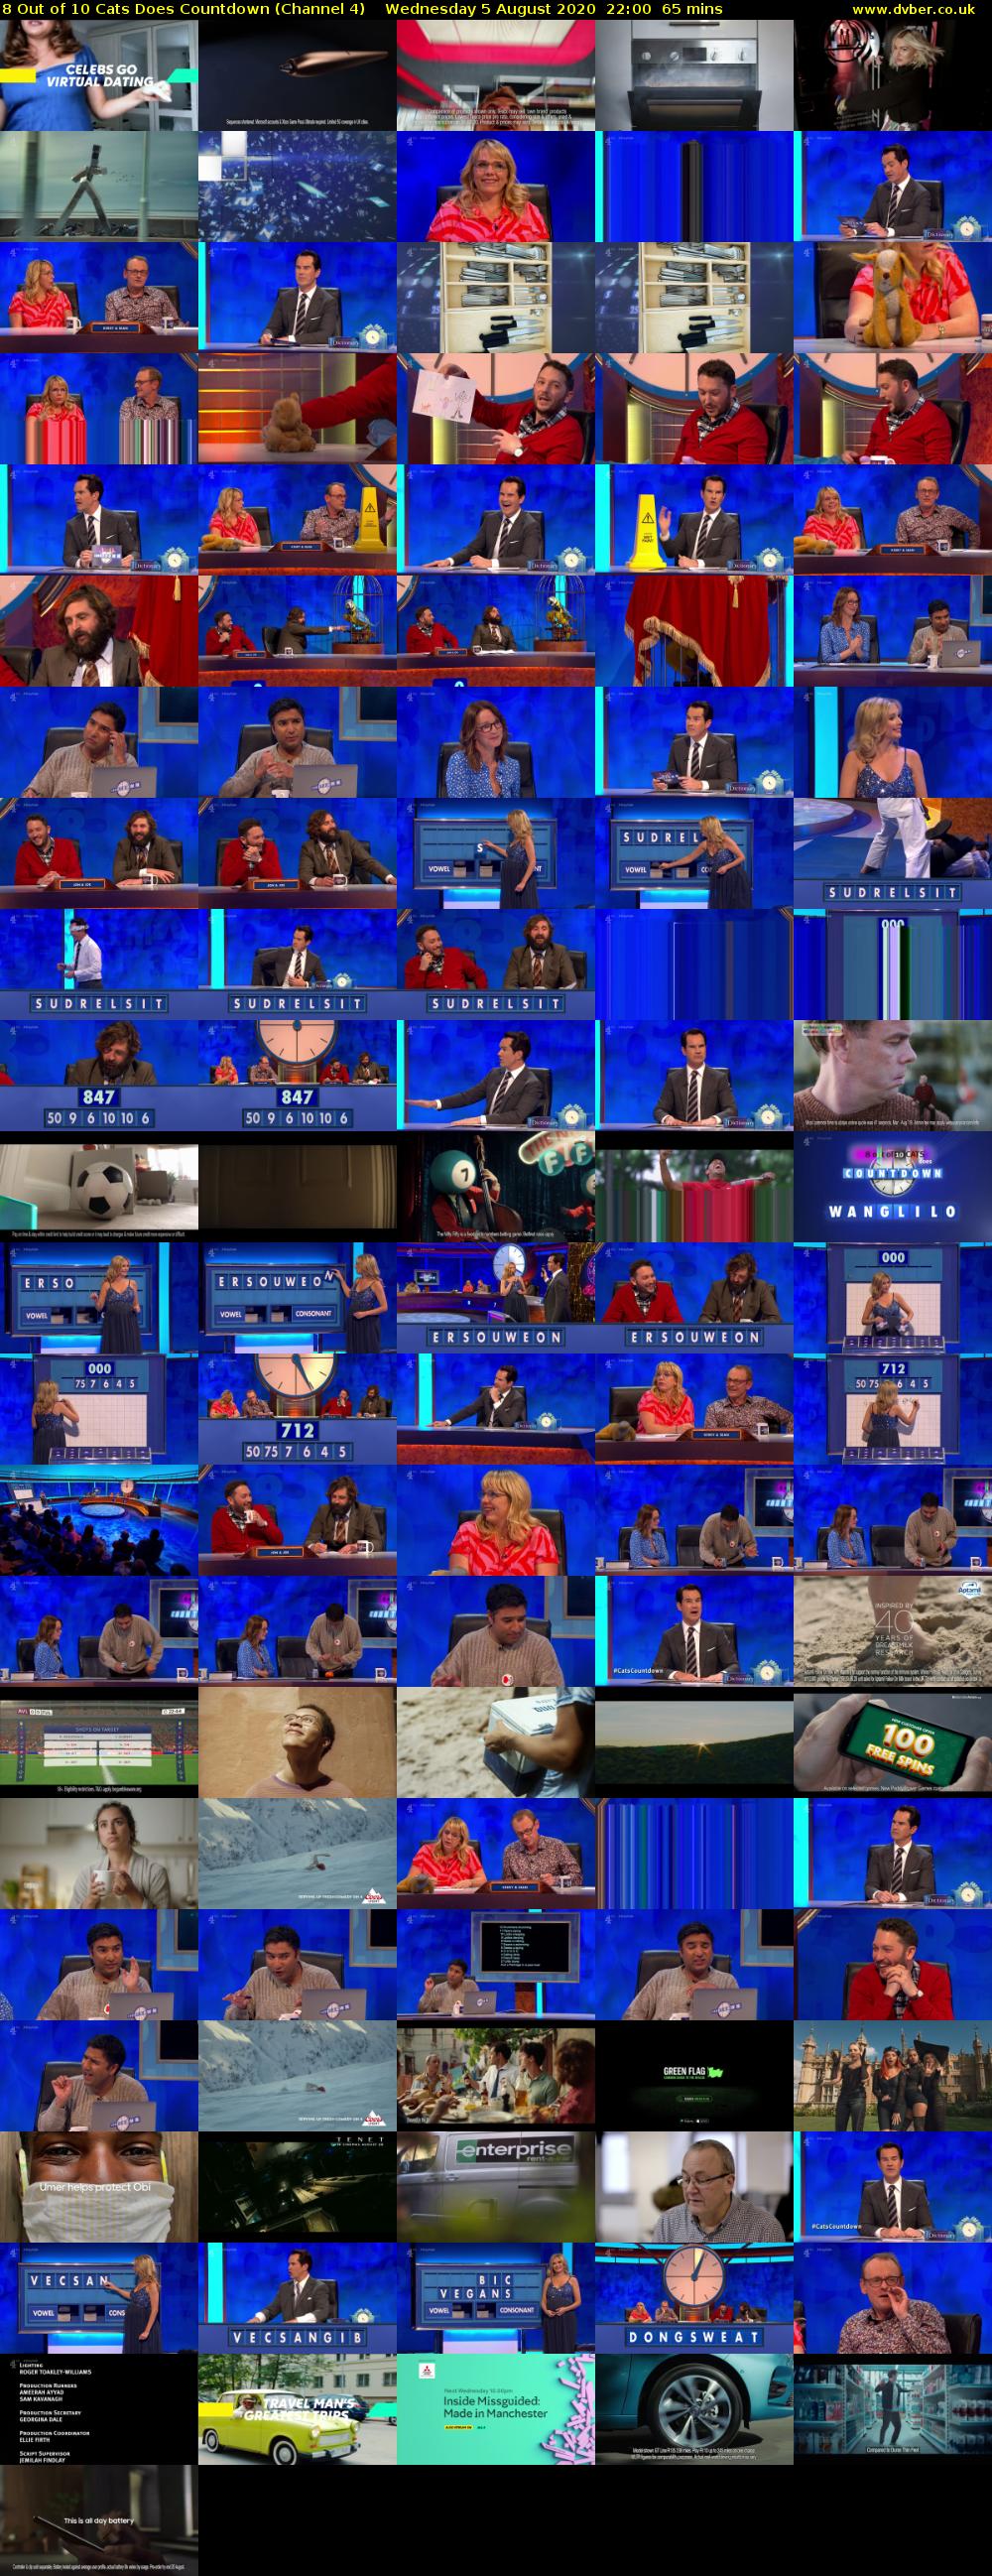 8 Out of 10 Cats Does Countdown (Channel 4) Wednesday 5 August 2020 22:00 - 23:05